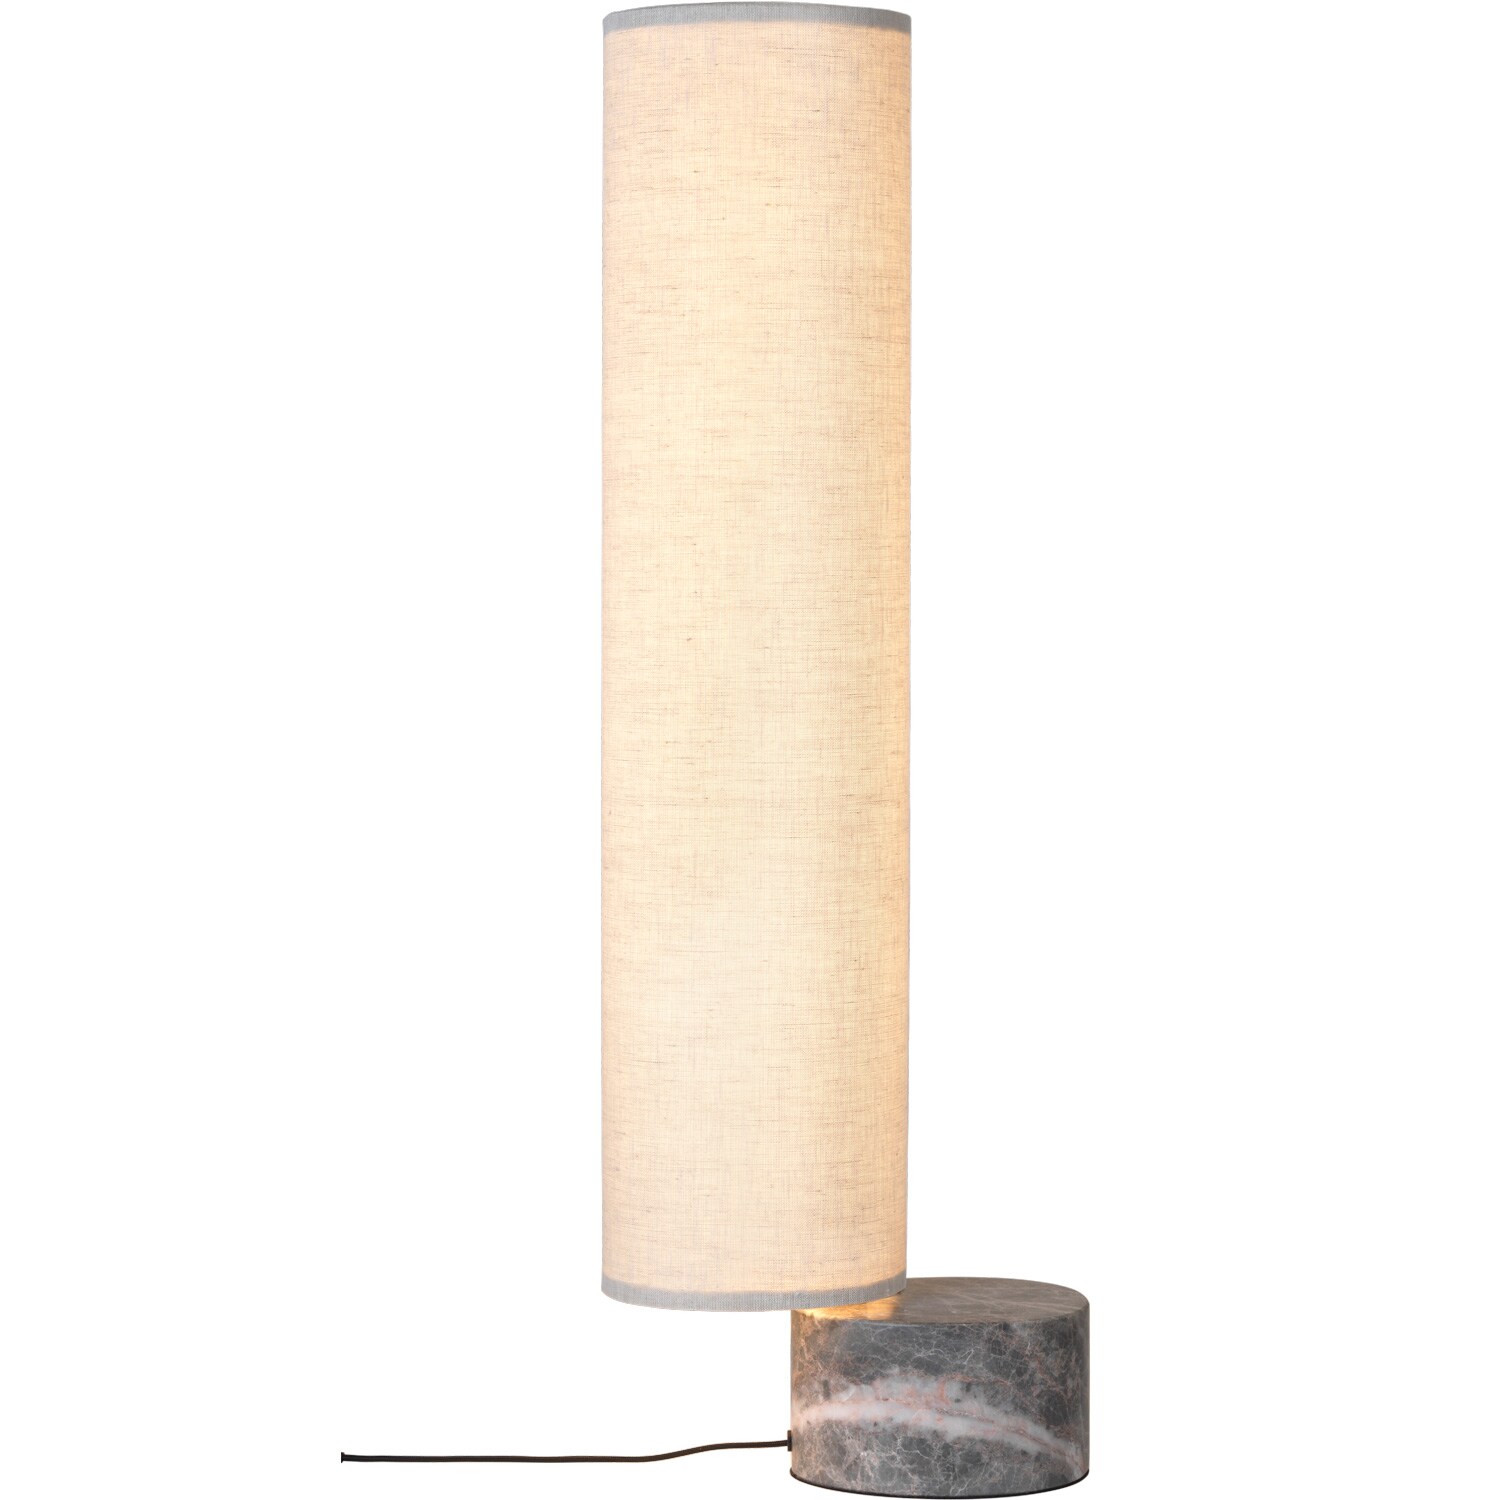 Unbound Floor Lamp Canvas Ø17x80 Cm, Lottie Silver Hammered Metal Touch Table Lamp